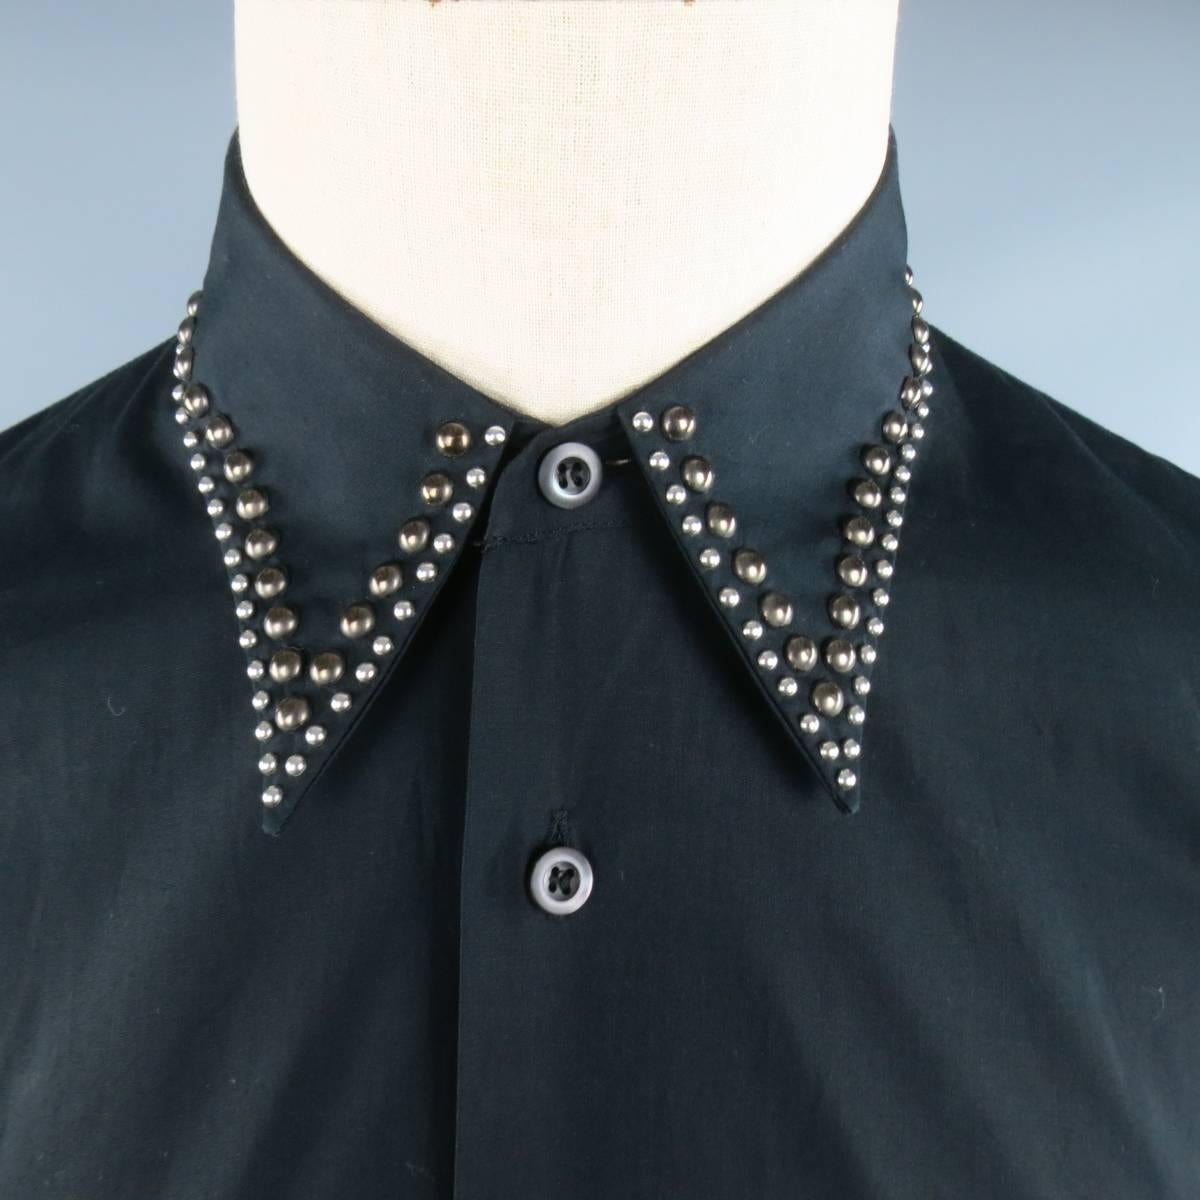 PRADA Fall Winter 2009 Collection shirt comes in black cotton and featuring a pointed collar with silver and copper tone studded trim. Made in Italy.
 
Good Pre-Owned Condition.
Marked: 39 / 15 1/2
 
Measurements:
 
Shoulder: 17 in.
Chest: 42